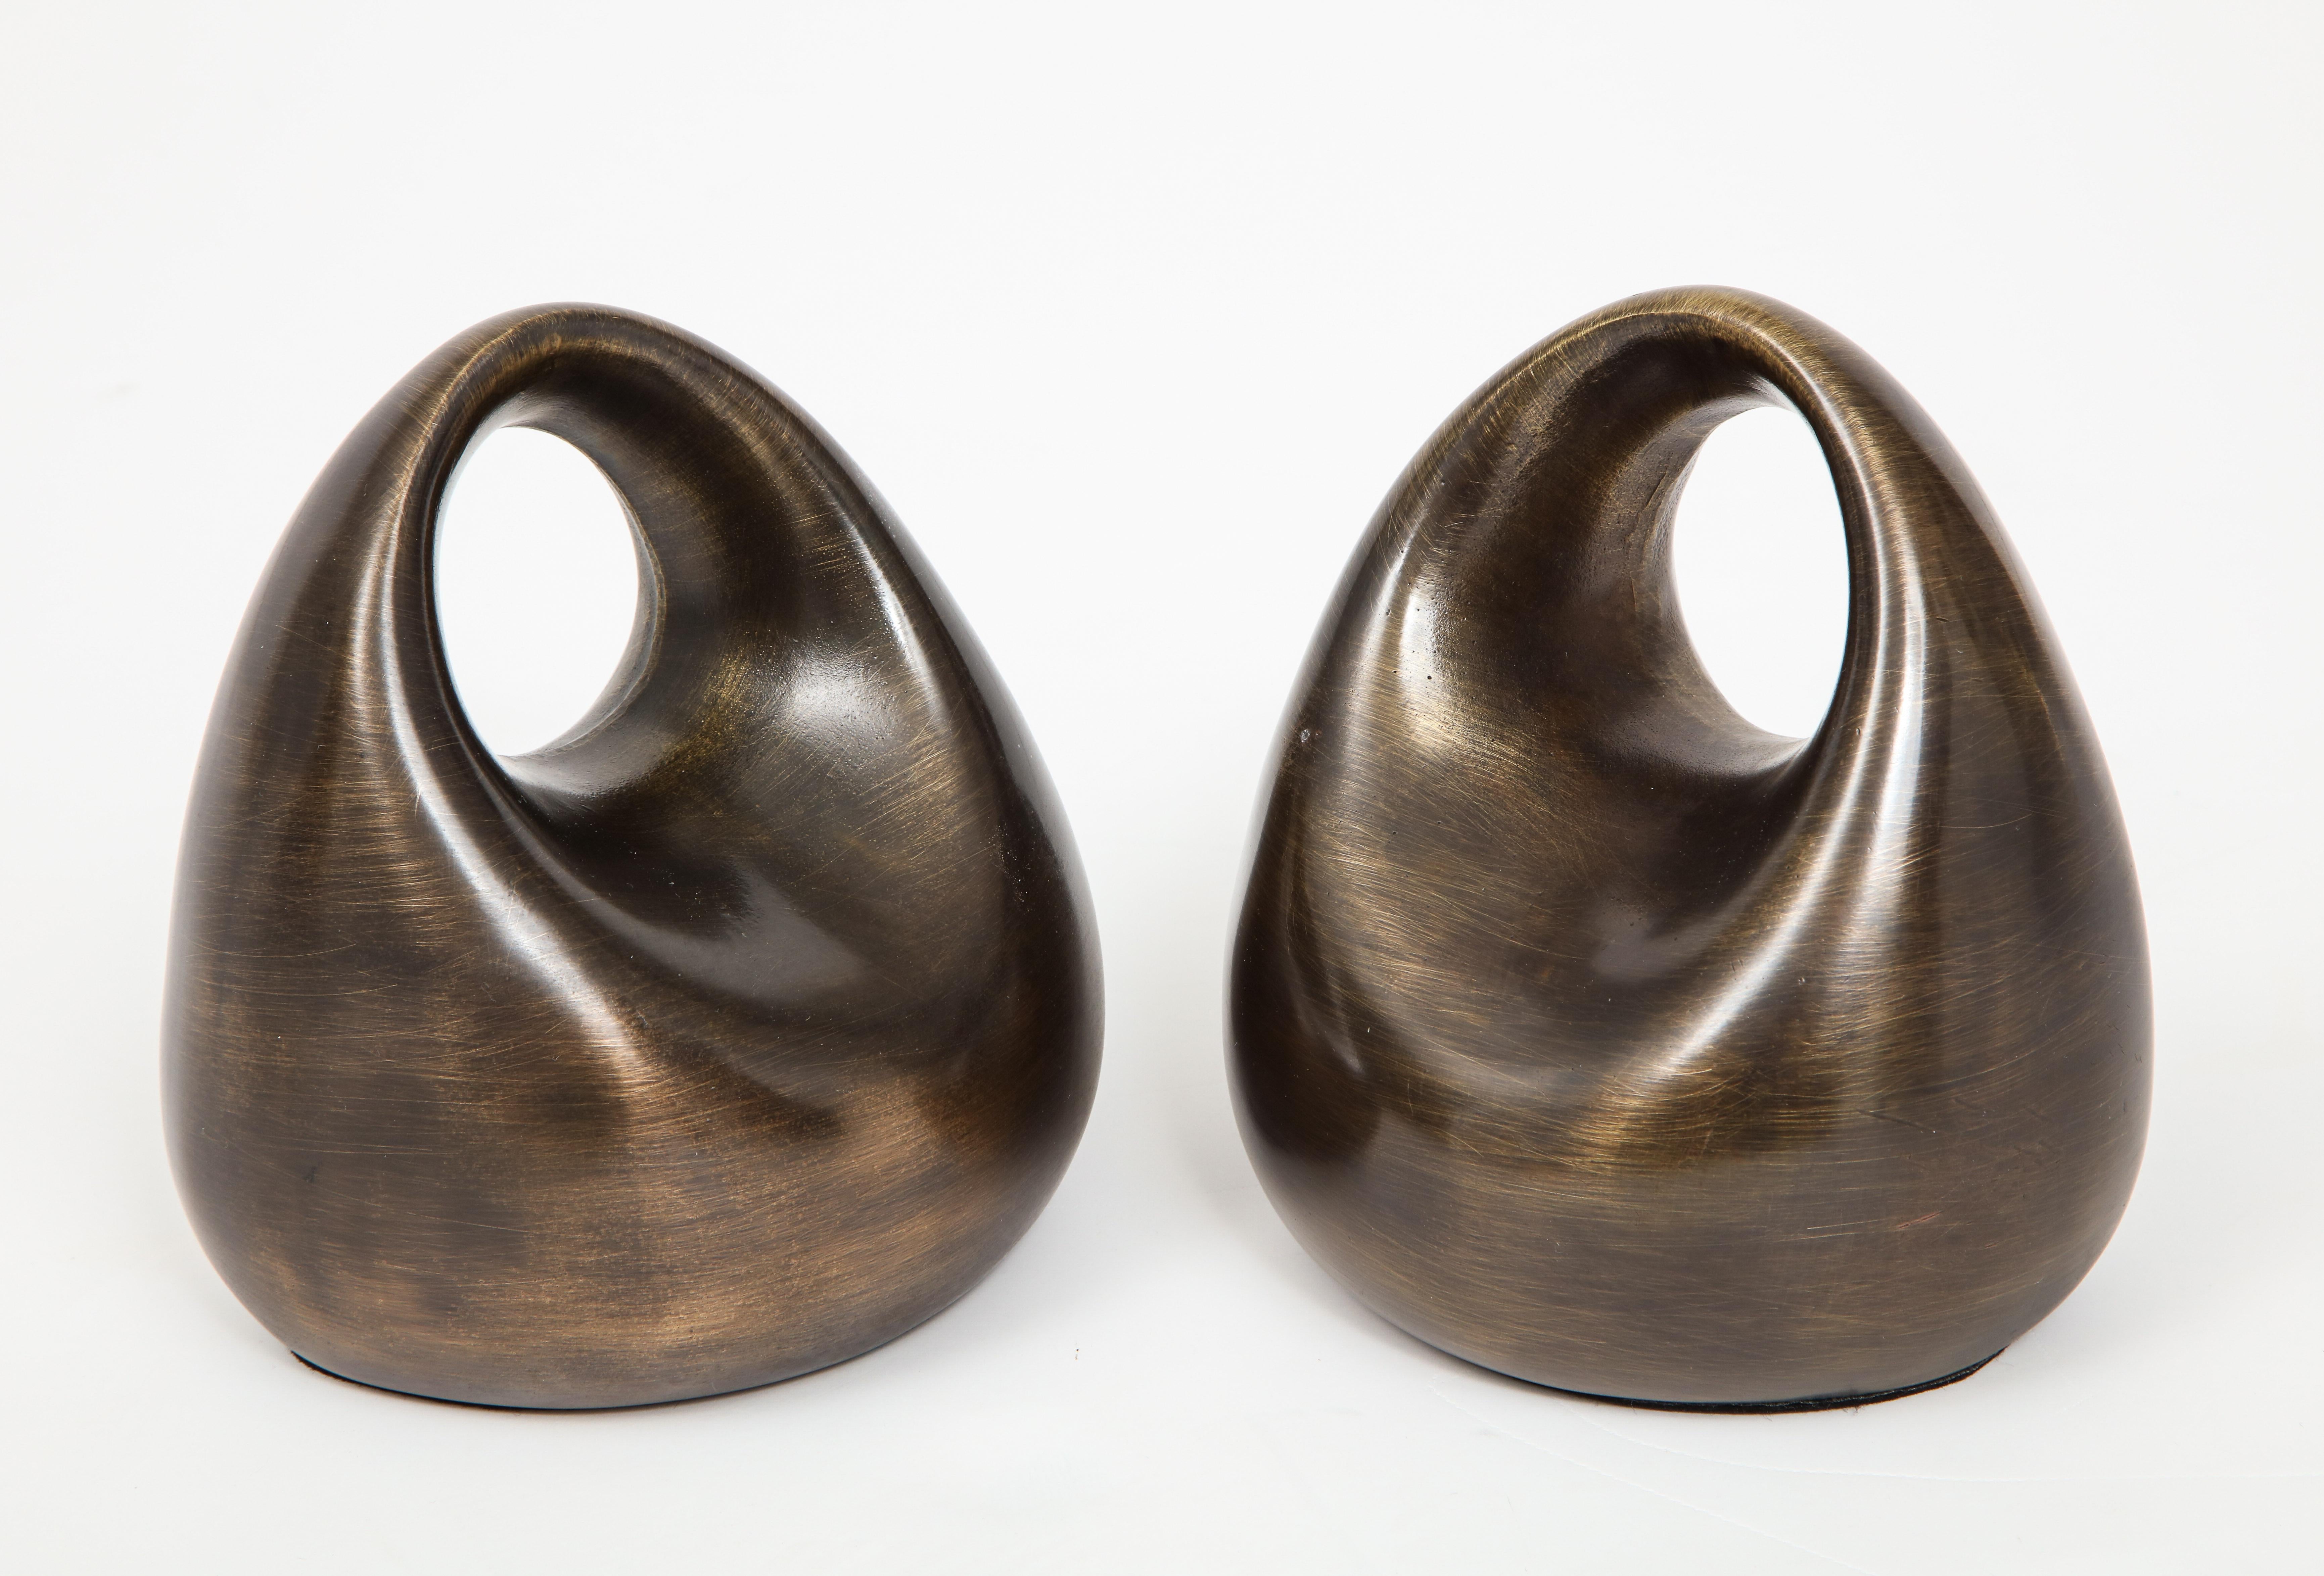 Pair of custom finished bronze, gunmetal bookends by Ben Seibel.